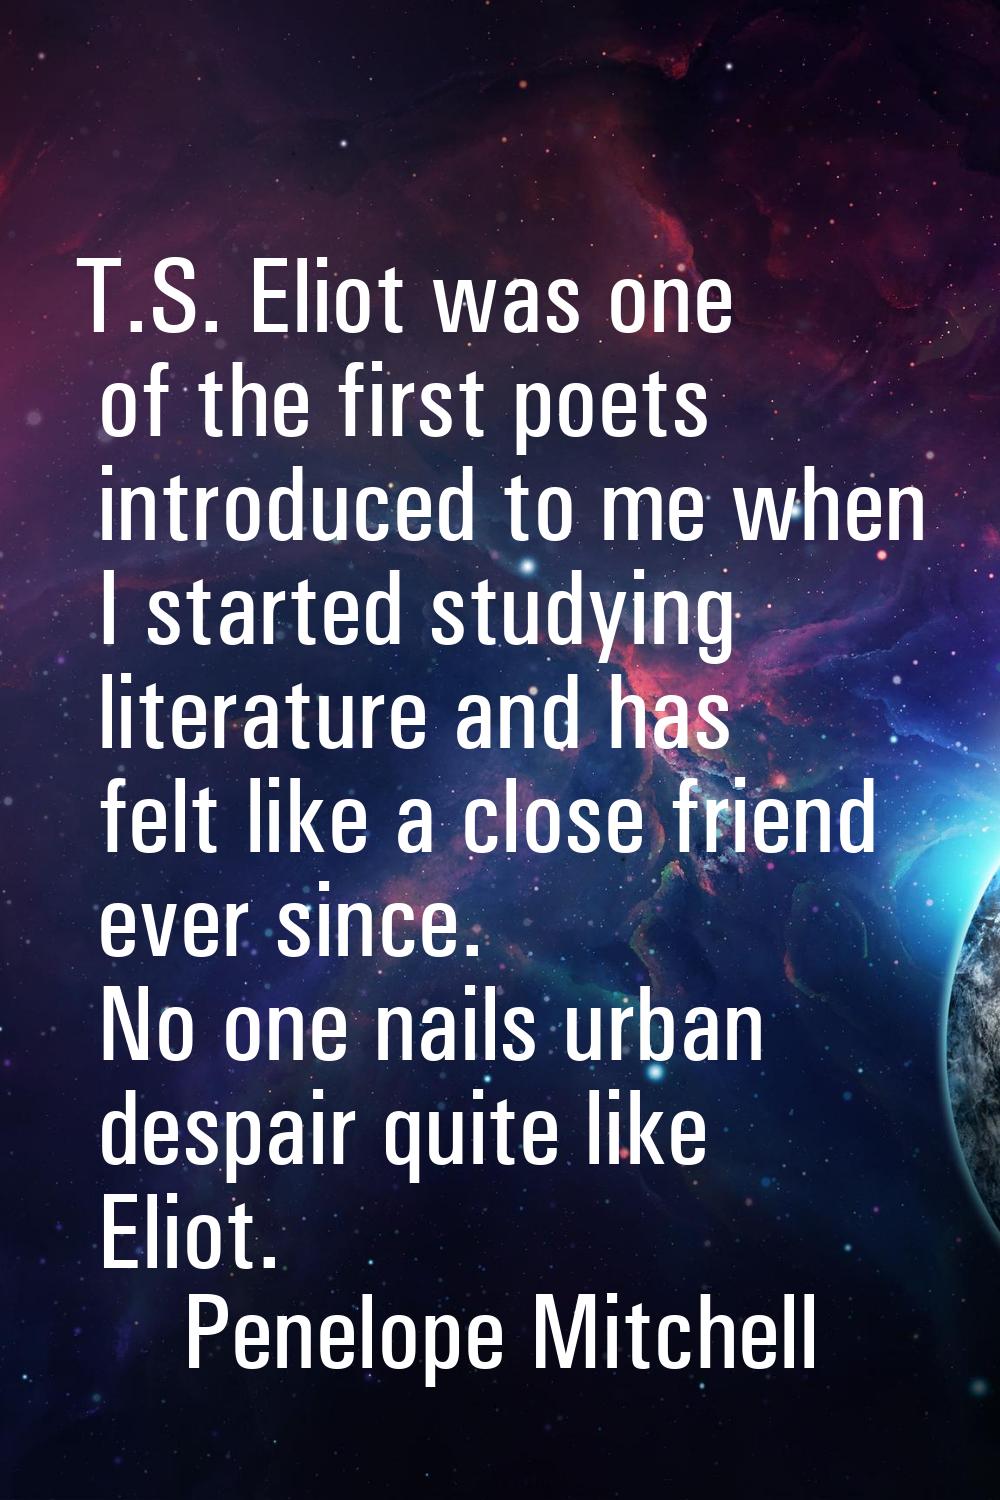 T.S. Eliot was one of the first poets introduced to me when I started studying literature and has f